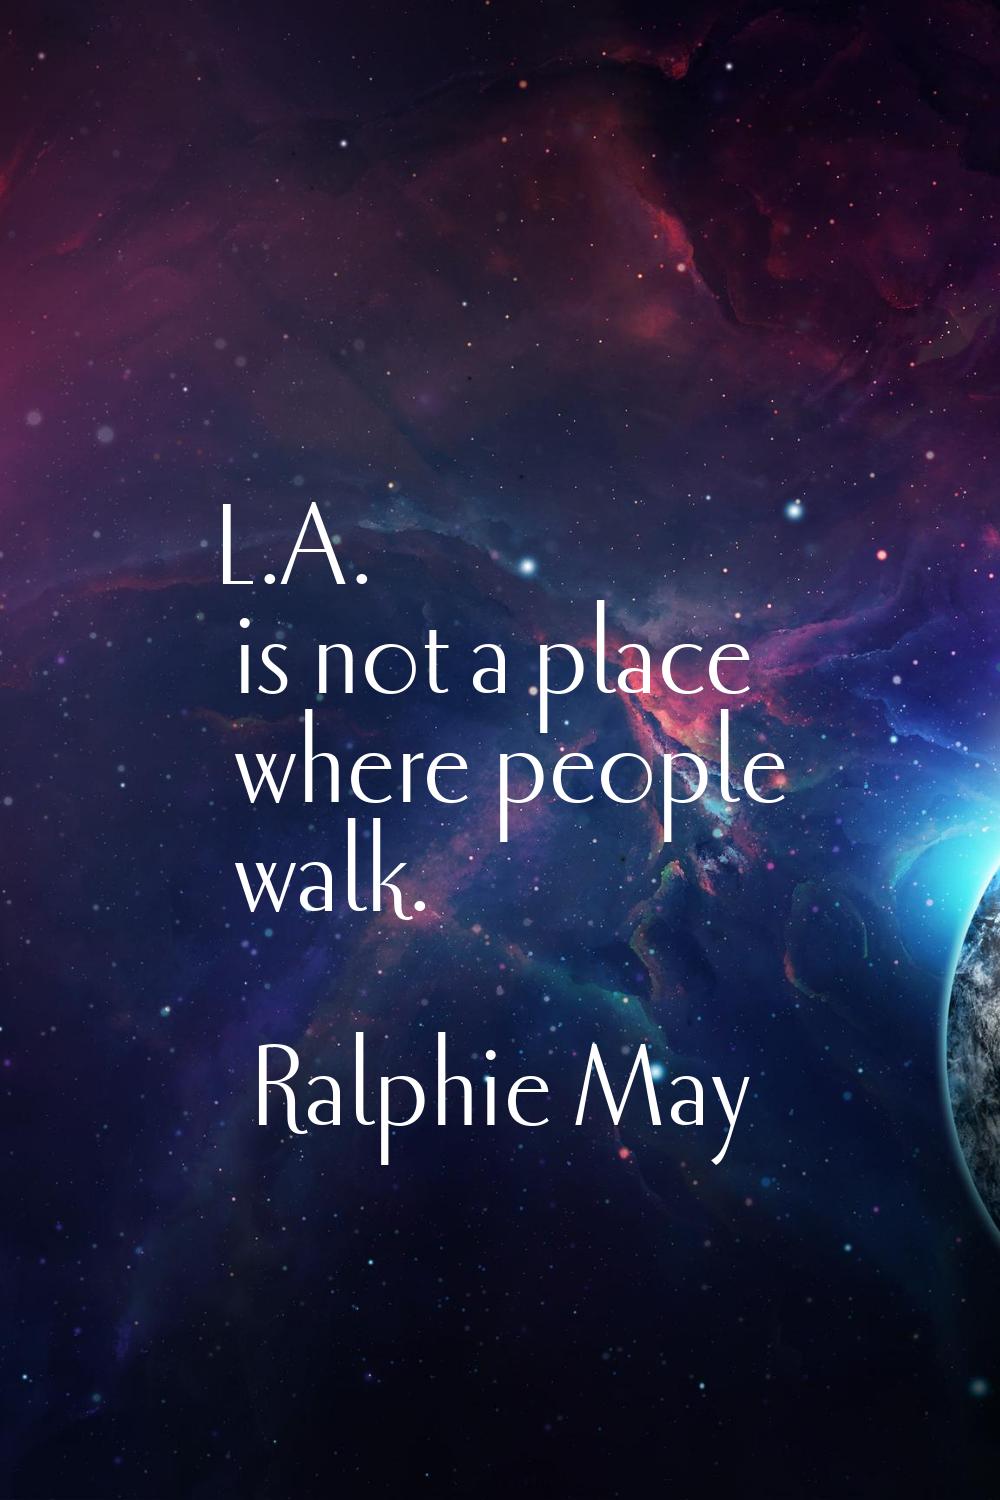 L.A. is not a place where people walk.